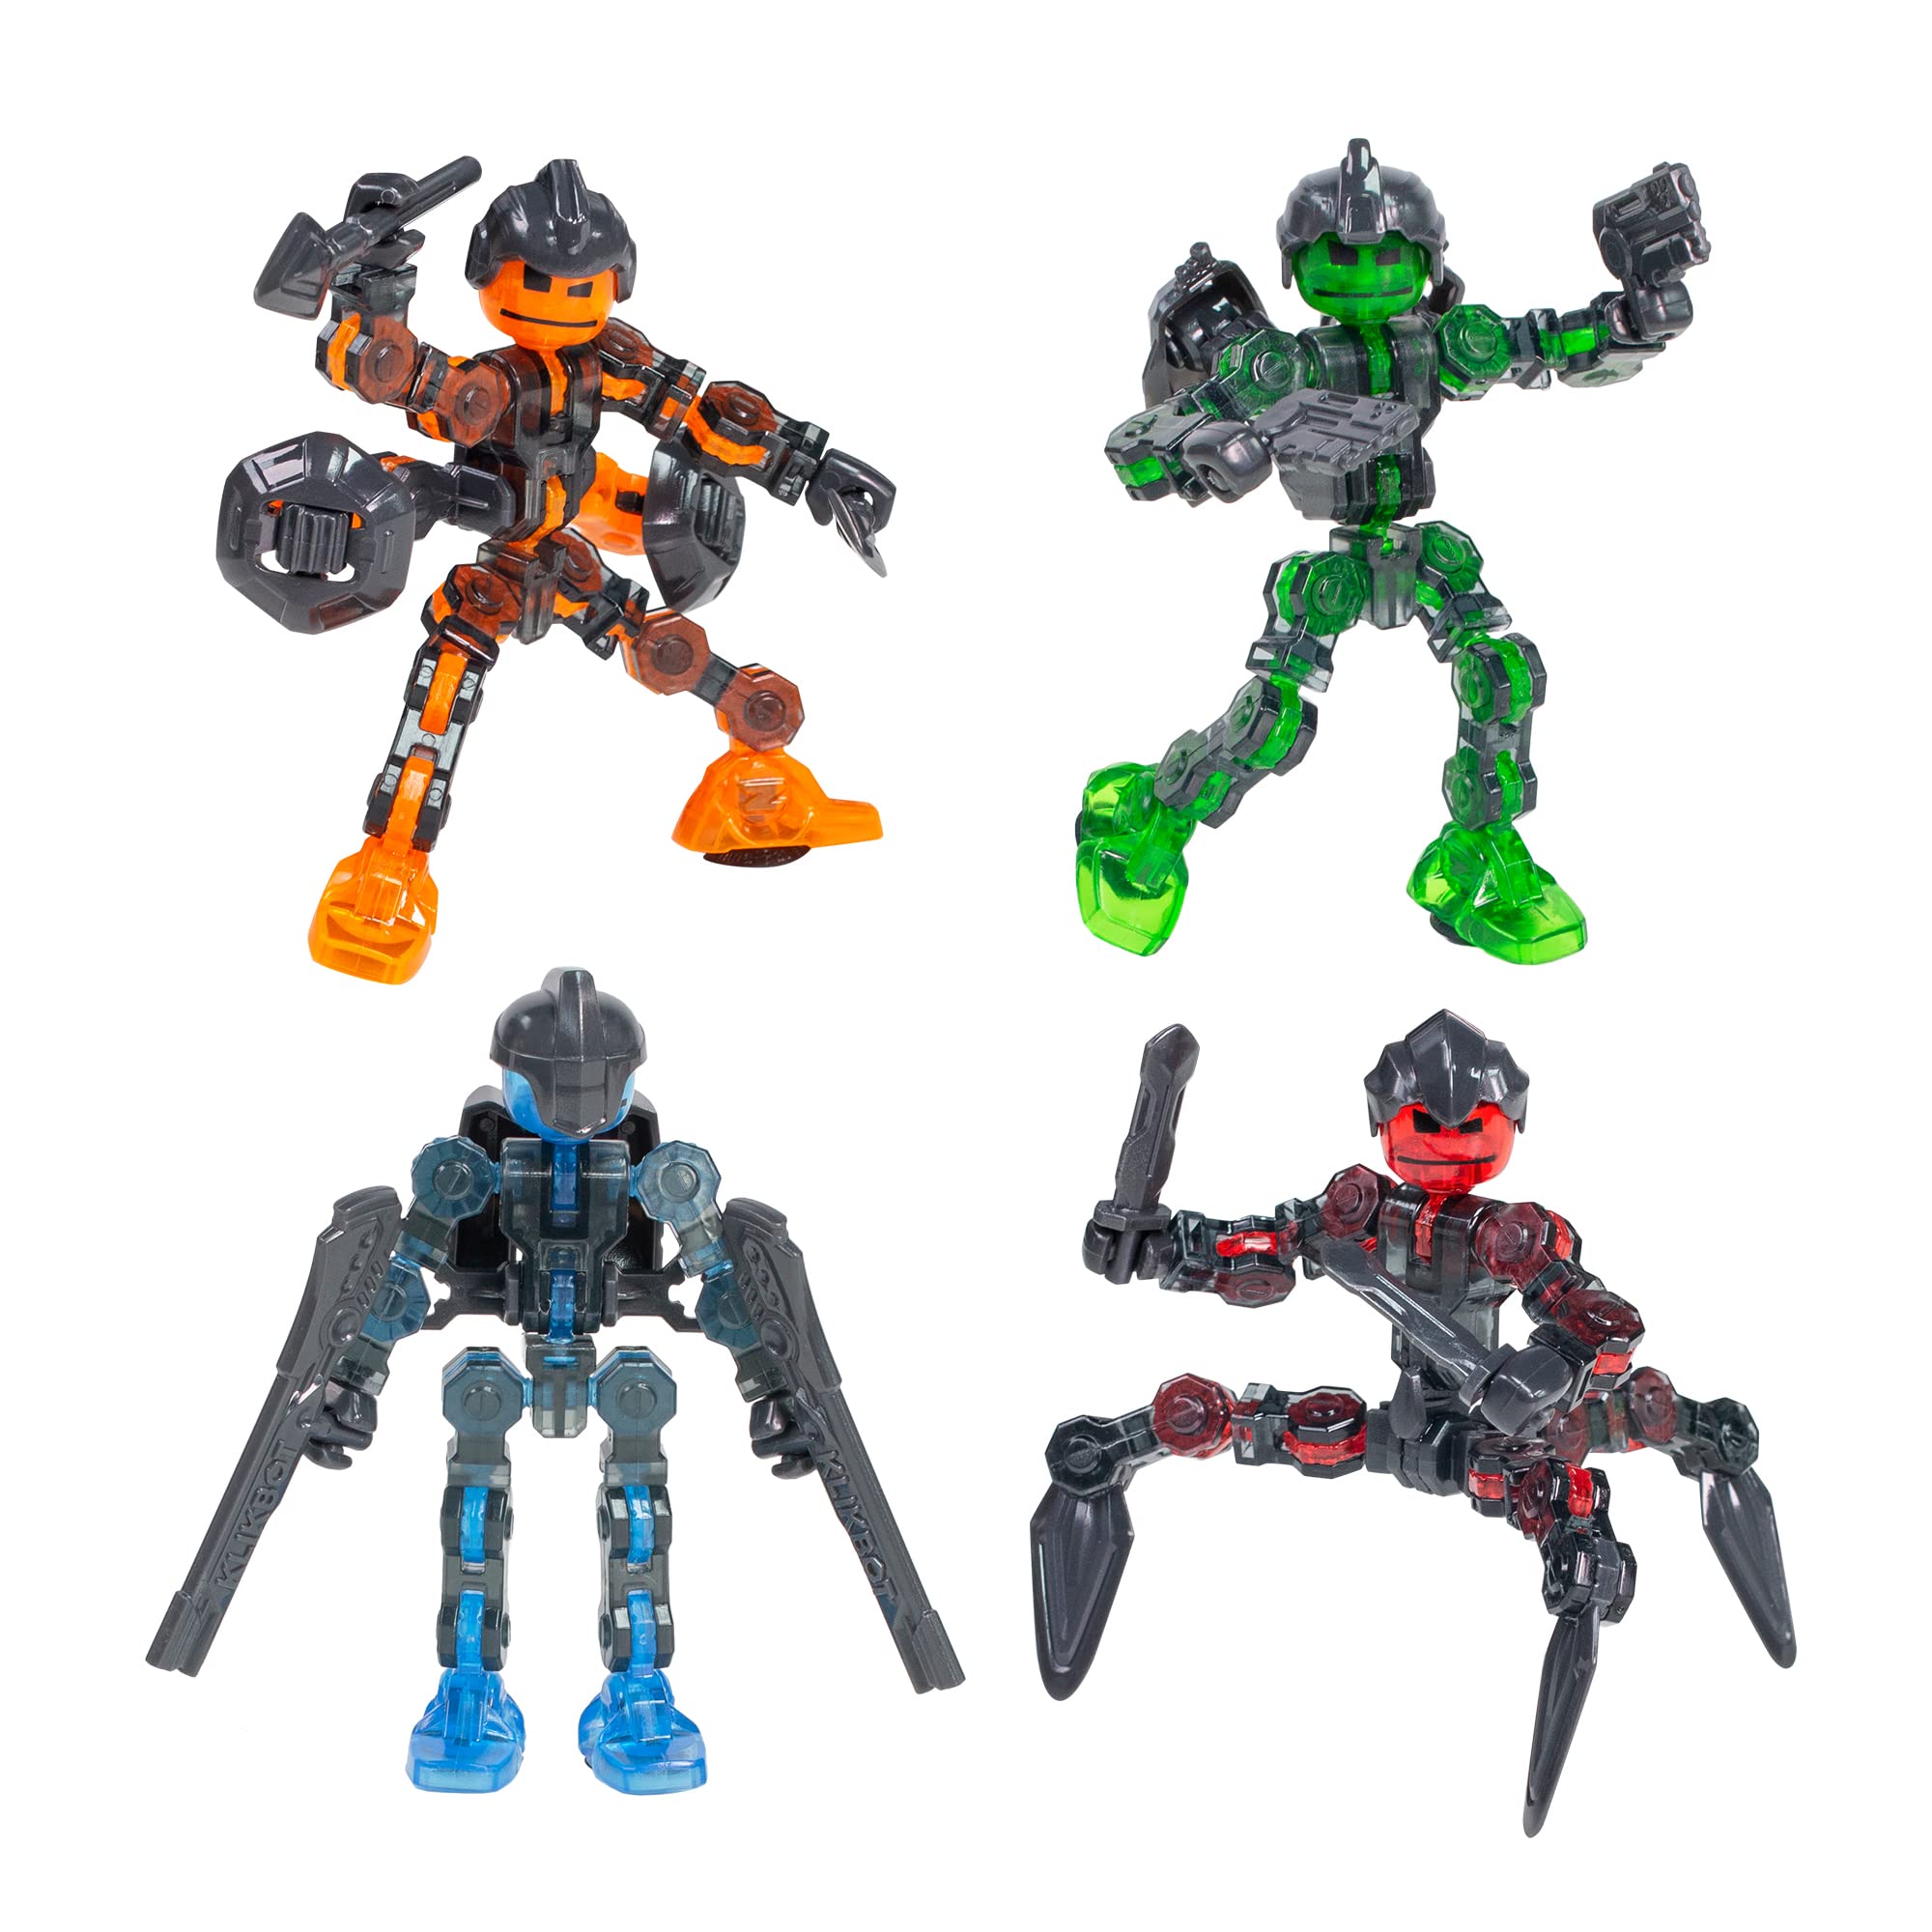 Zing Toys Zing Klikbot Complete Set Of 4 Poseable Action Figures With Weapons, Translucent, Create Stop Motion Animation, For Ages 6 And U